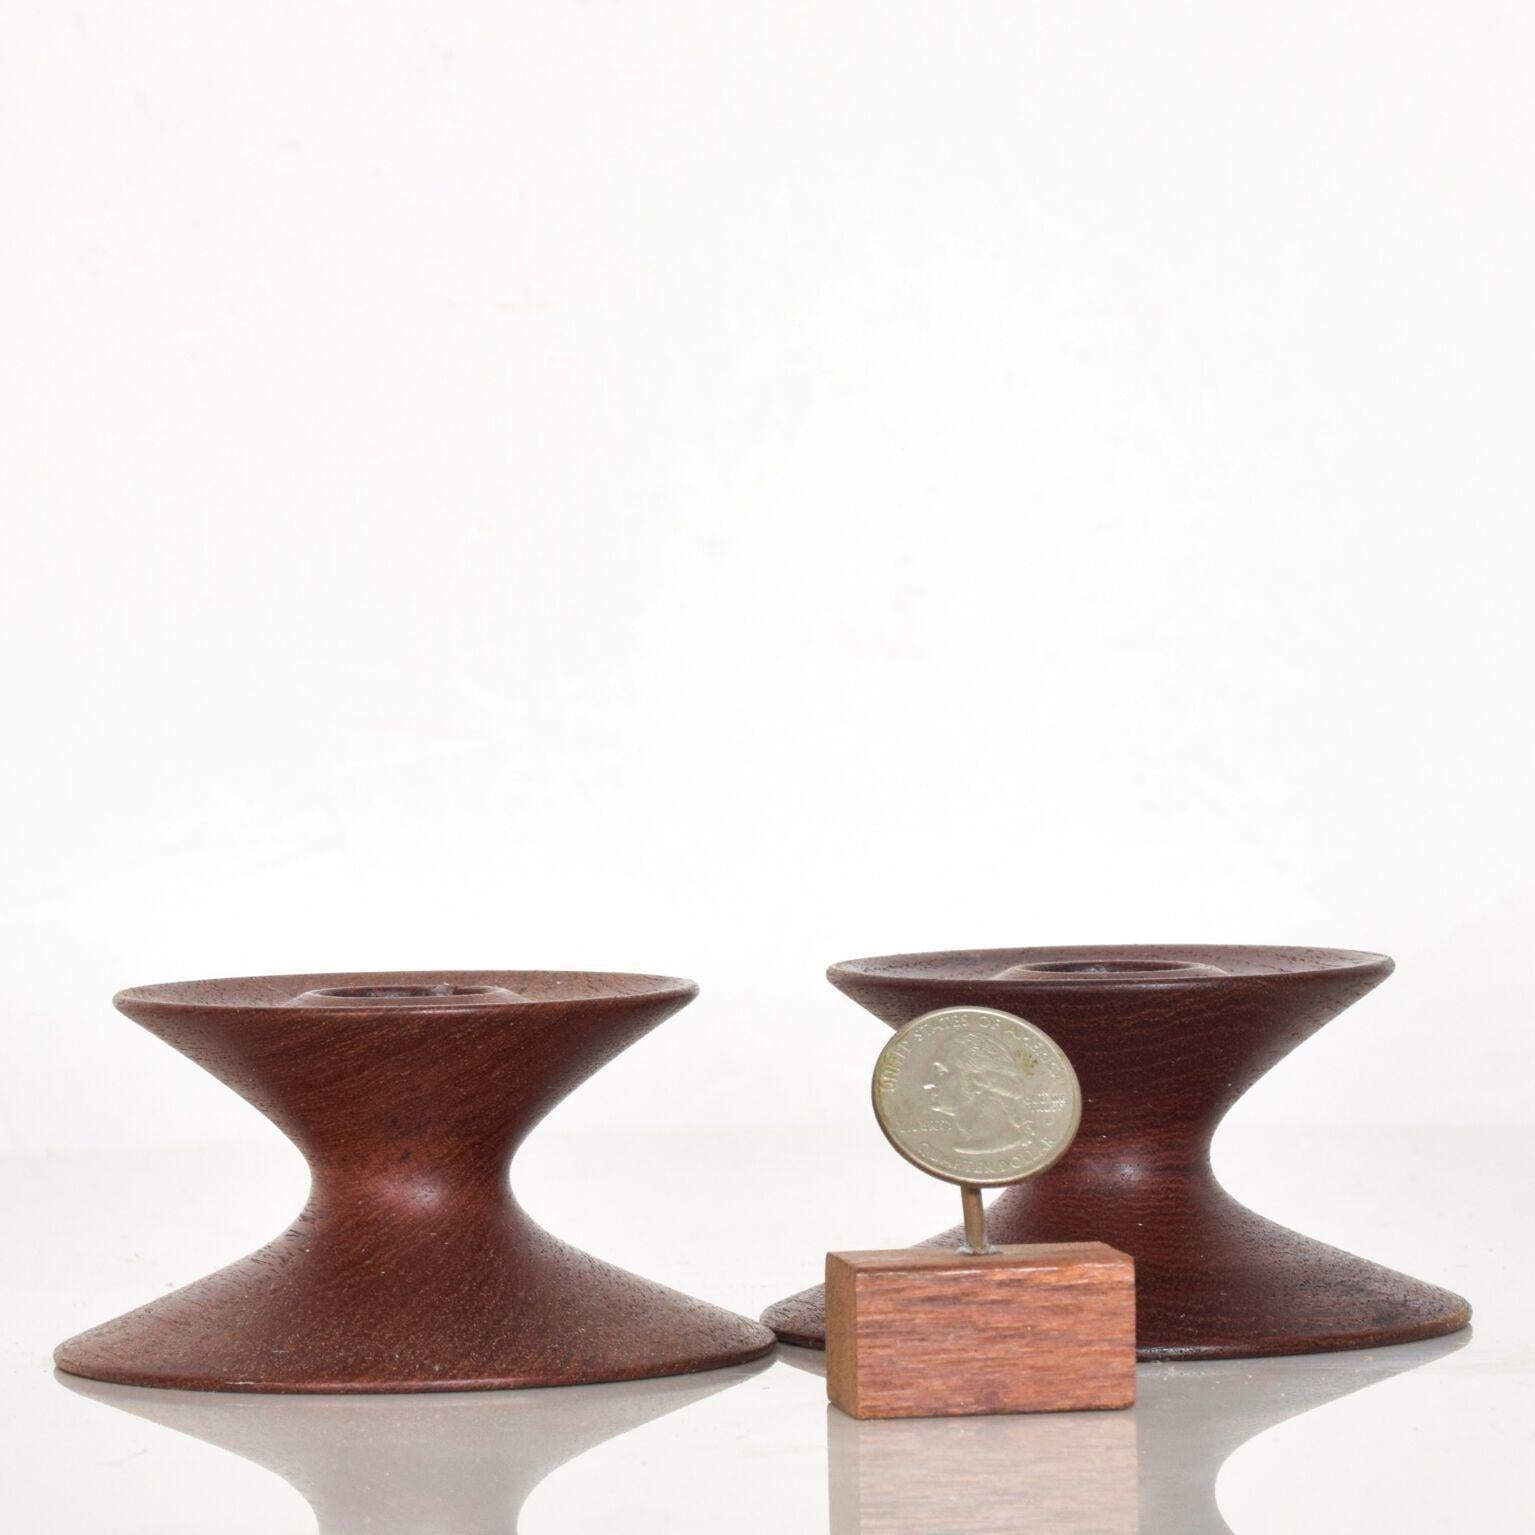 For your consideration: Danish modern elegant and sleek sculptural candleholders in teak dimensions: 1 3/4